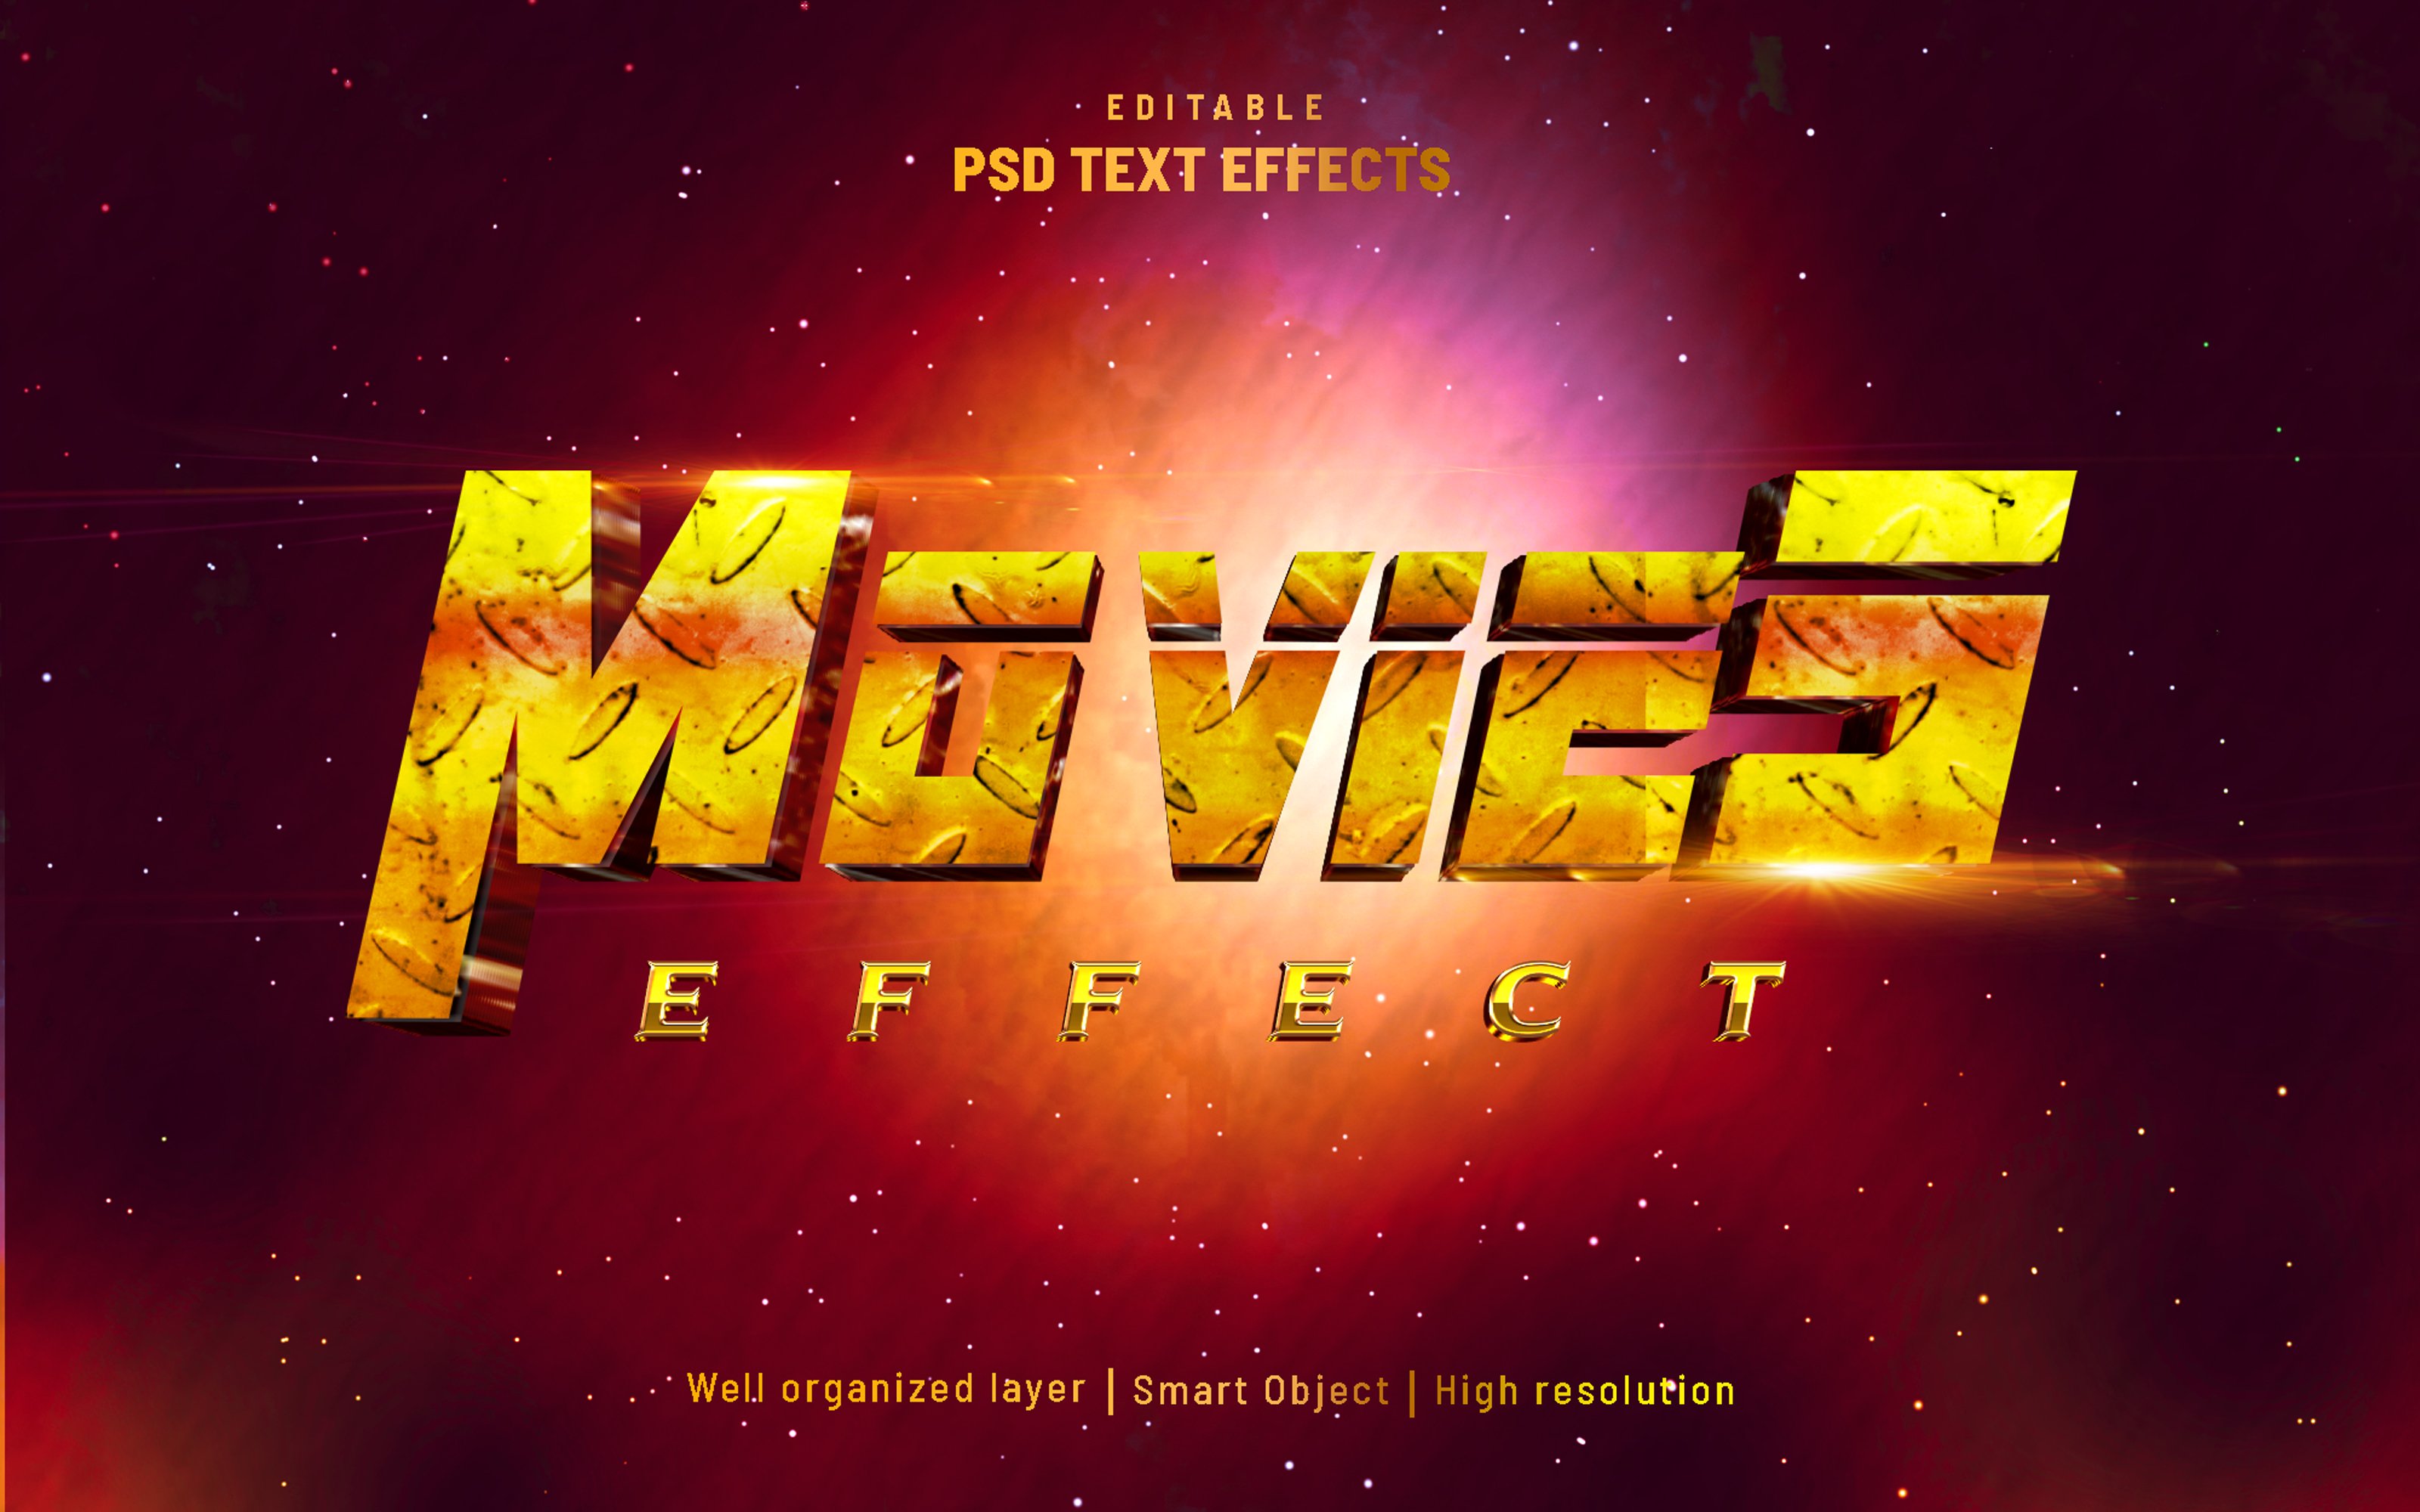 Movies editable text effect PSDcover image.